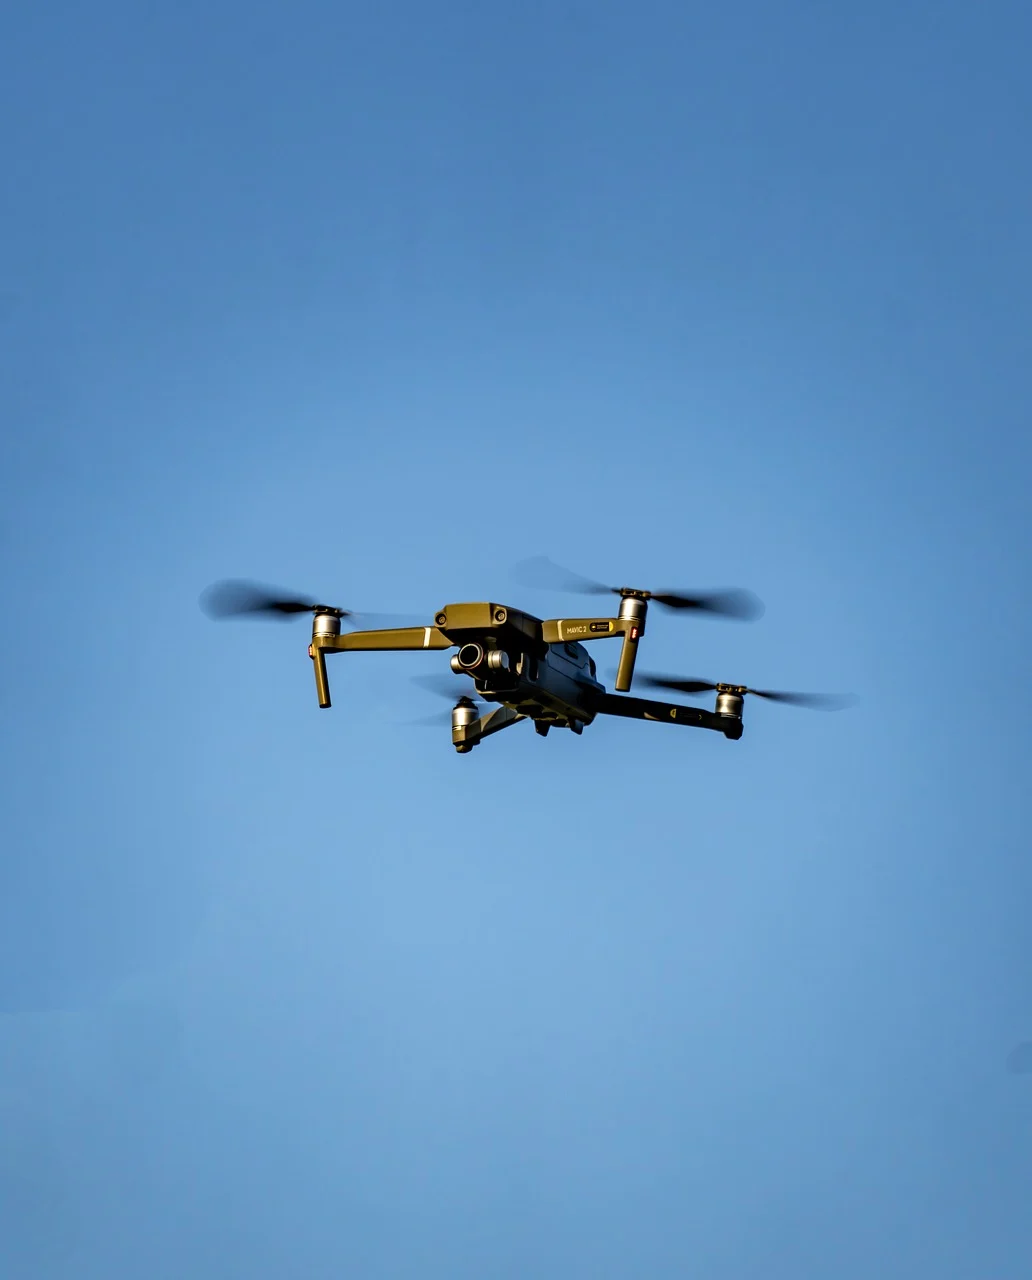 Weapon being developed to blast drones with radio waves, says UK